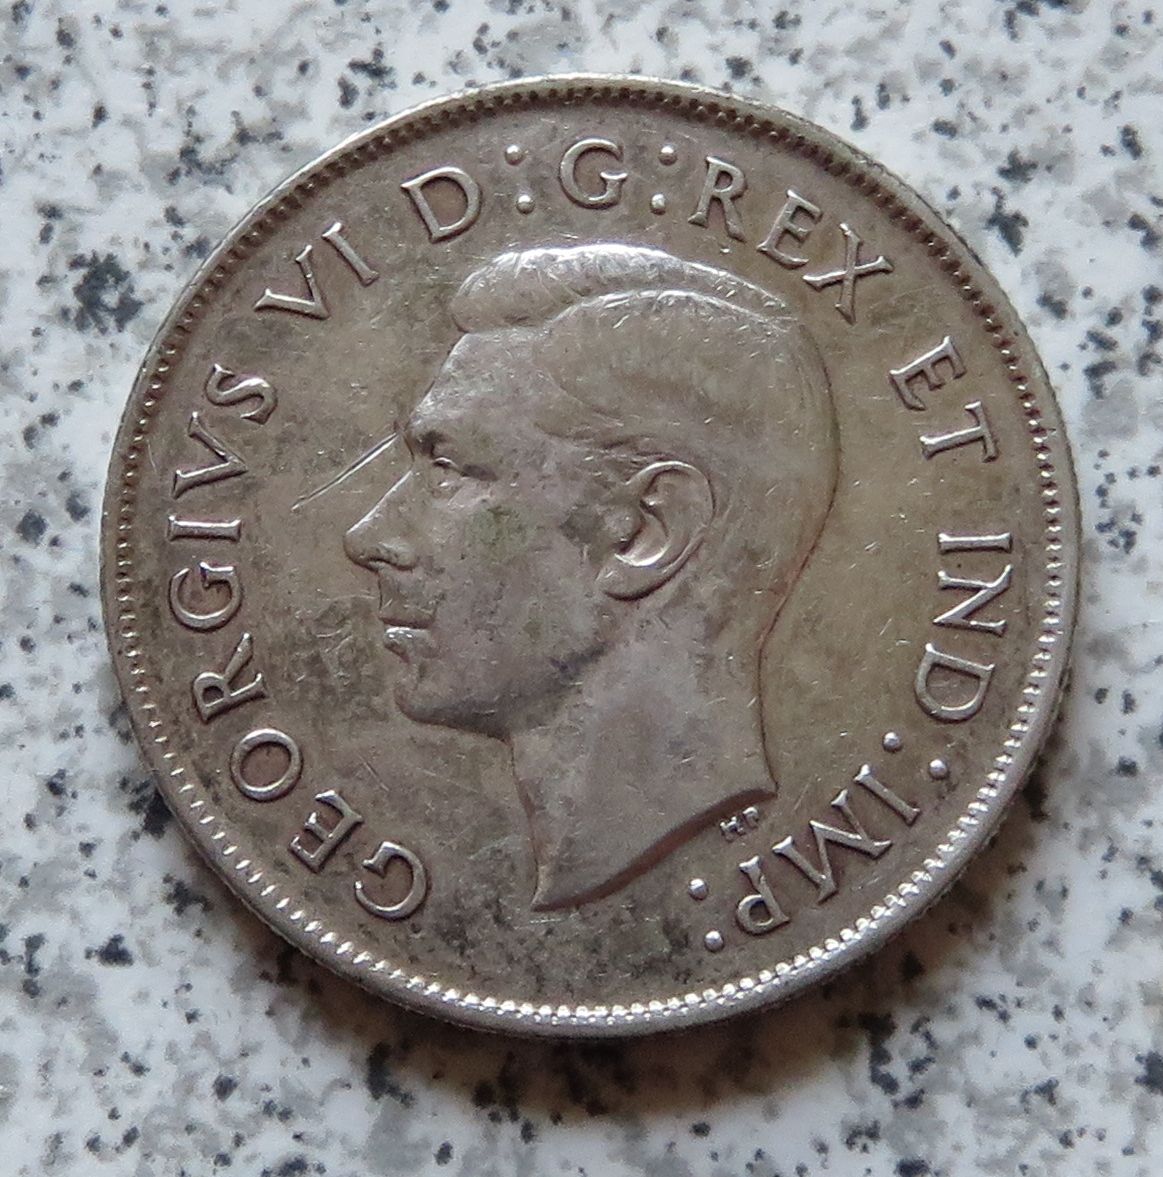  Canada 50 Cents 1944   